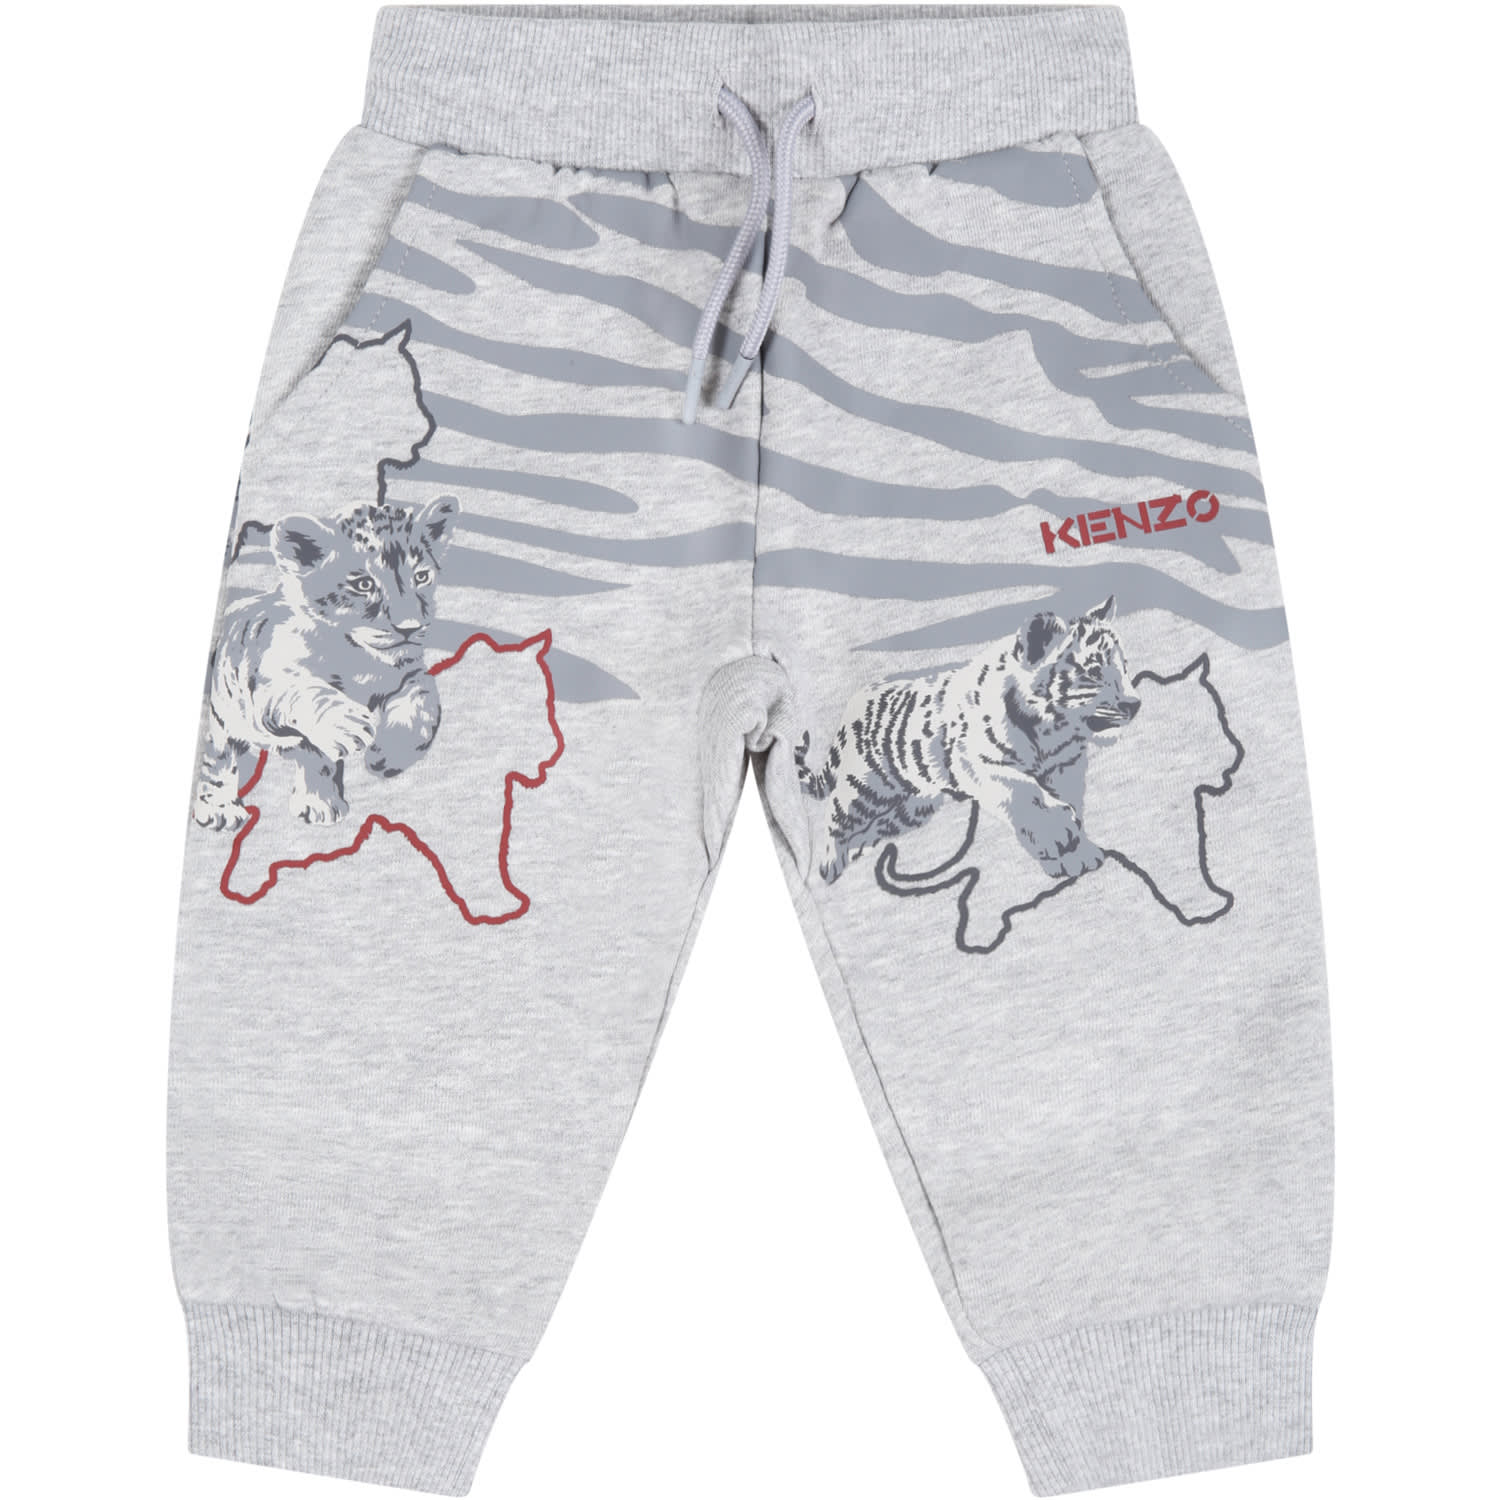 Kenzo Kids Grey Sweatpant For Baby Boy With Tigers